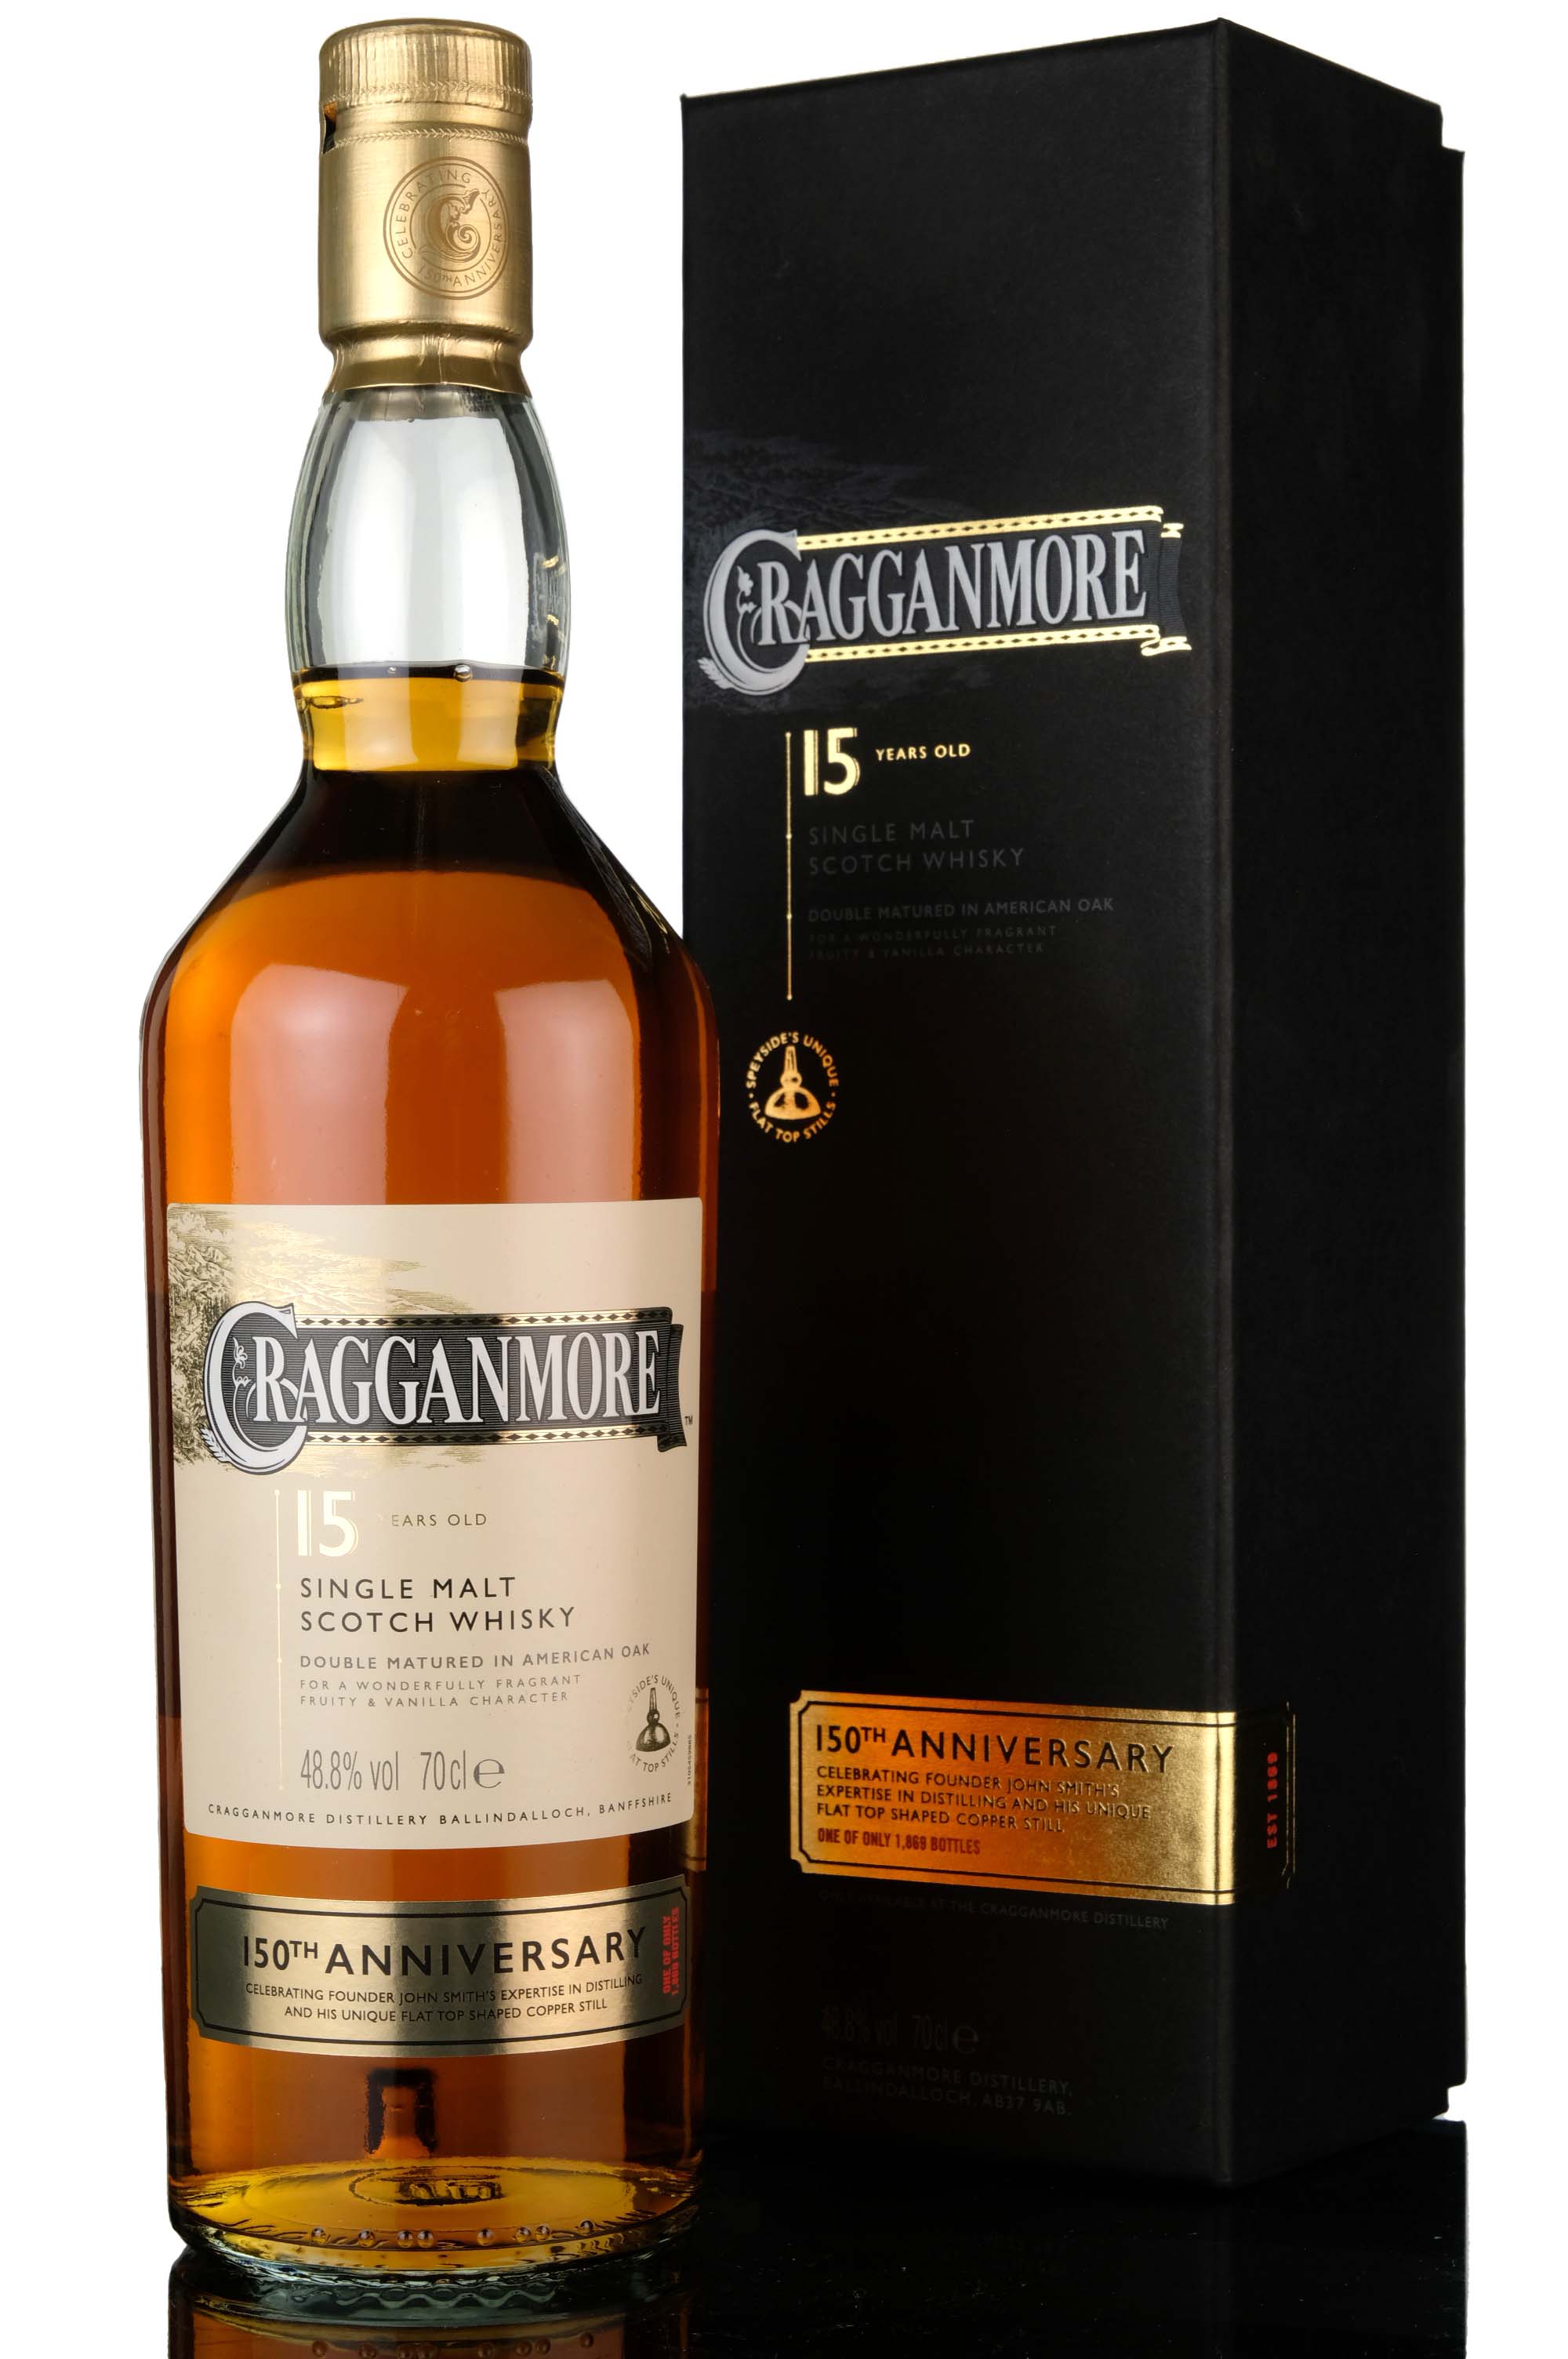 Cragganmore 15 Year Old - 150th Anniversary 1869-2019